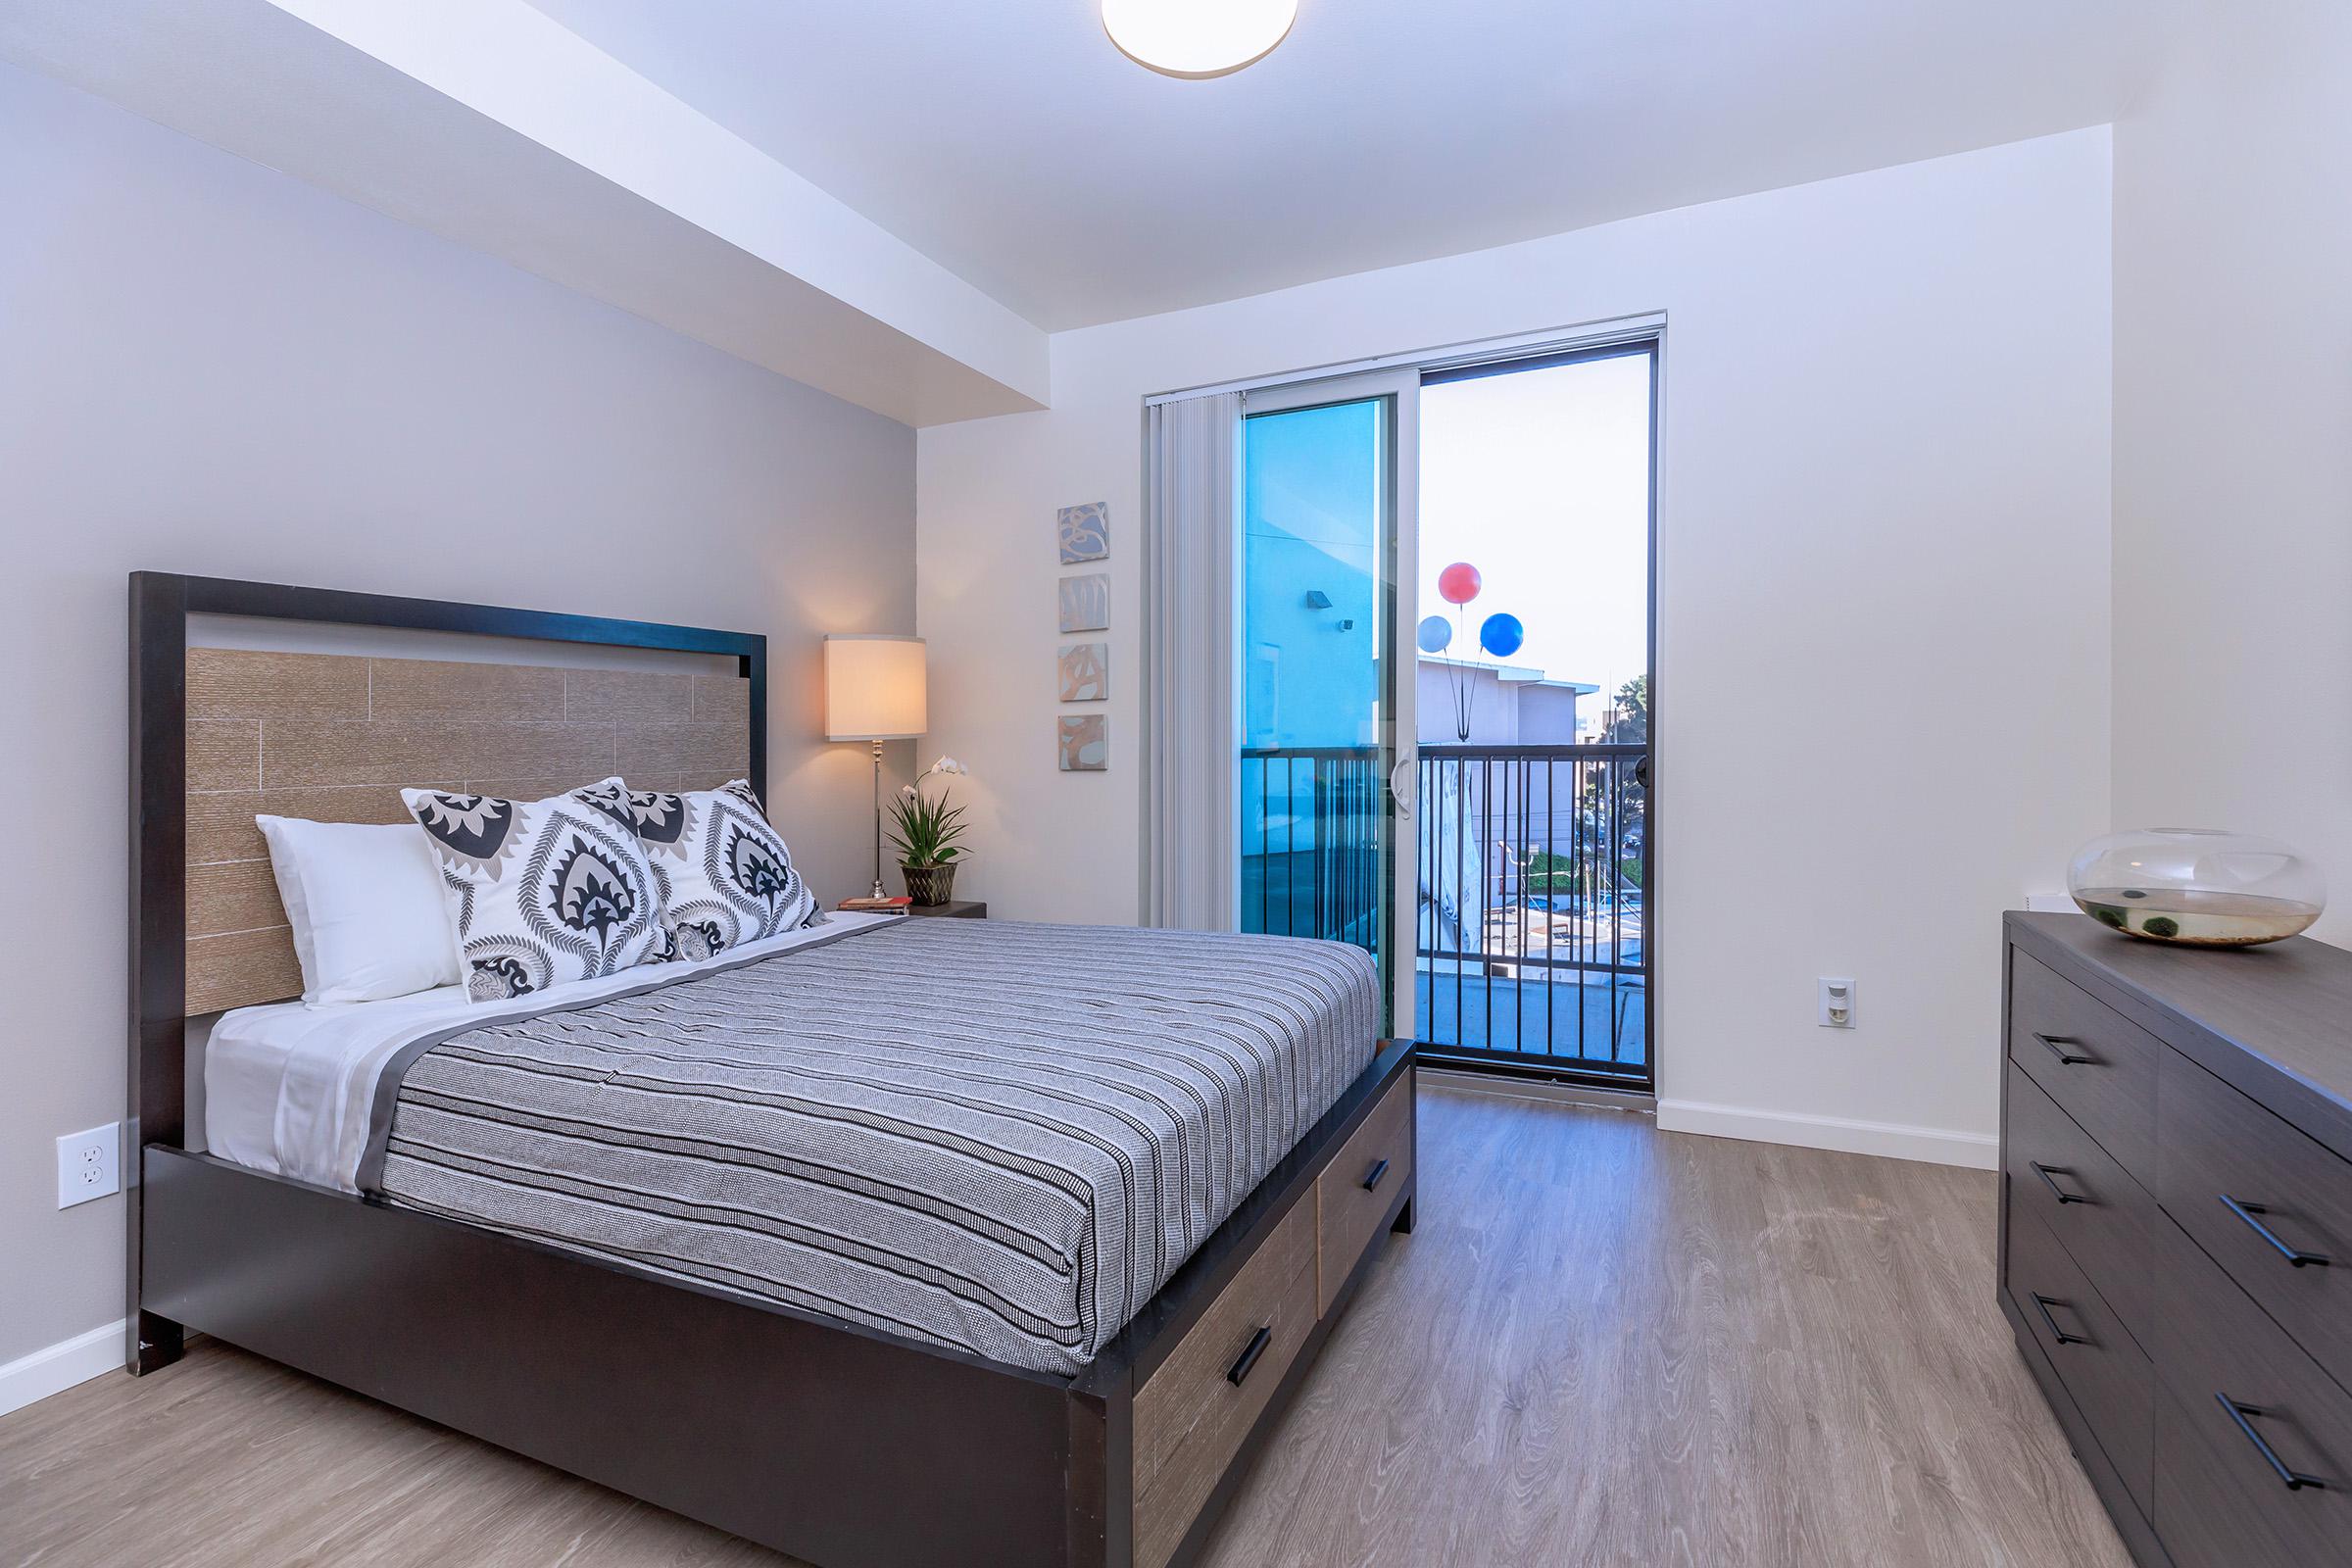 Apartments in Daly City CA for Rent-Brunswick Street Bedroom with Private Balcony, Hardwood-Styled Flooring, and Spacious Floor Plan Area